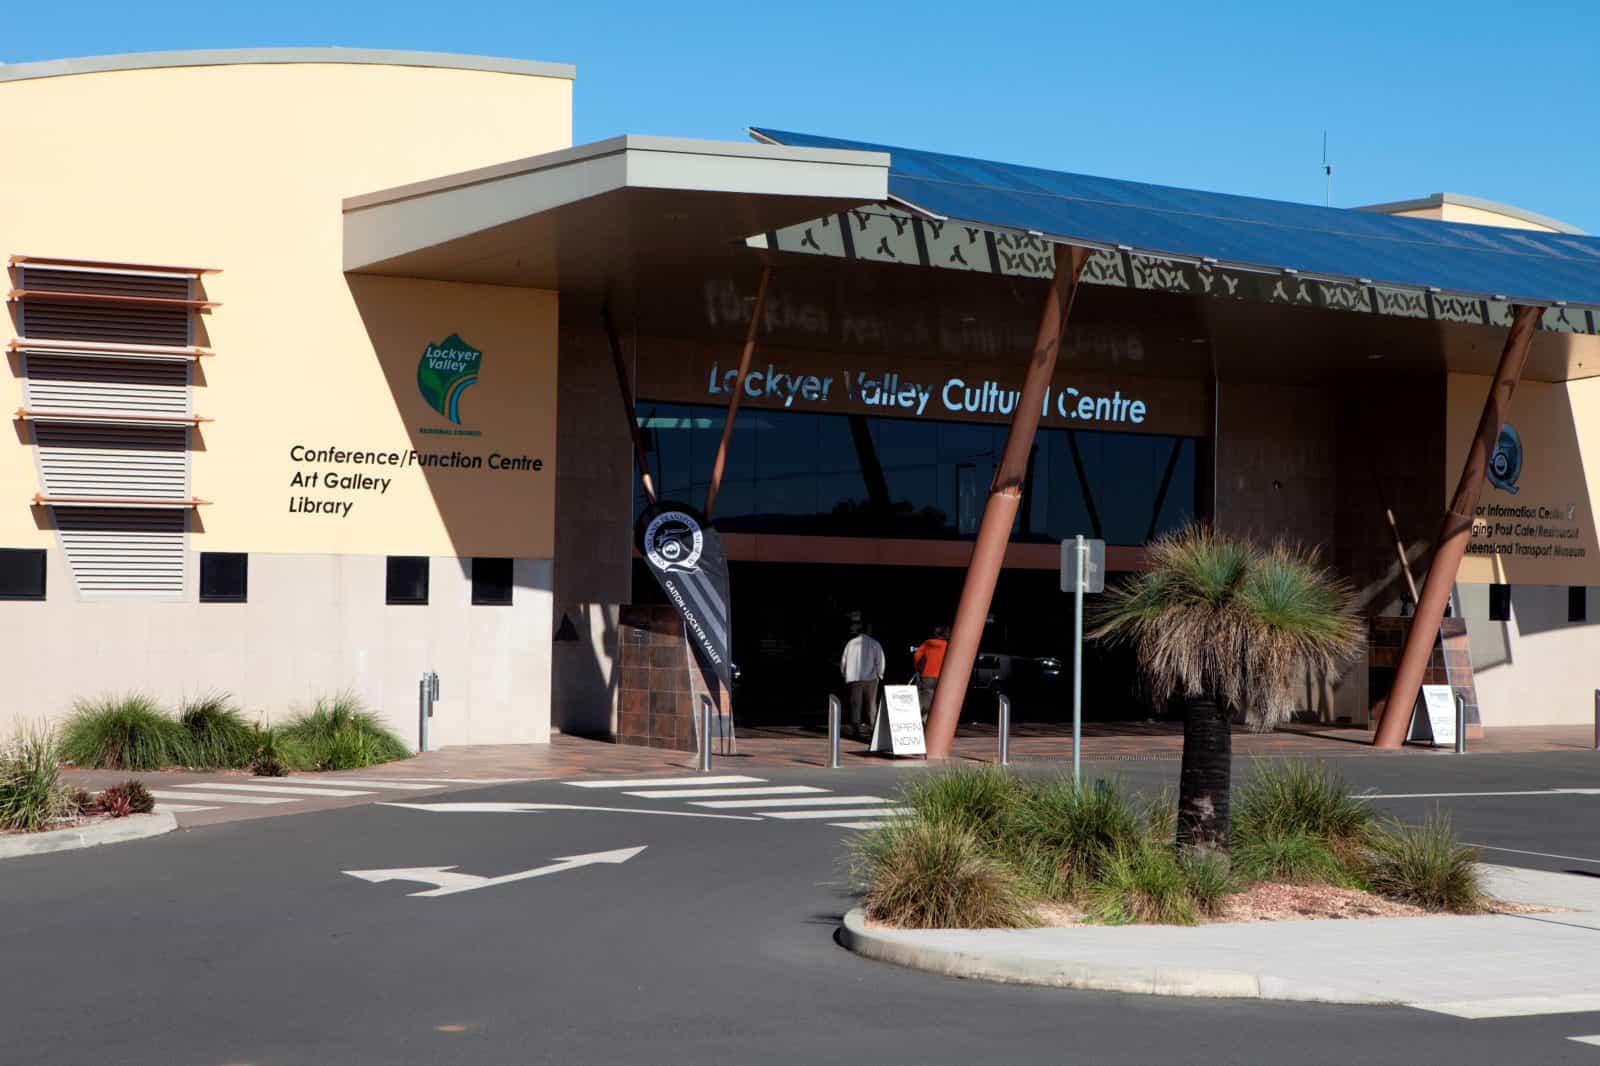 Lockyer Valley Cultural Centre, including visitor centre